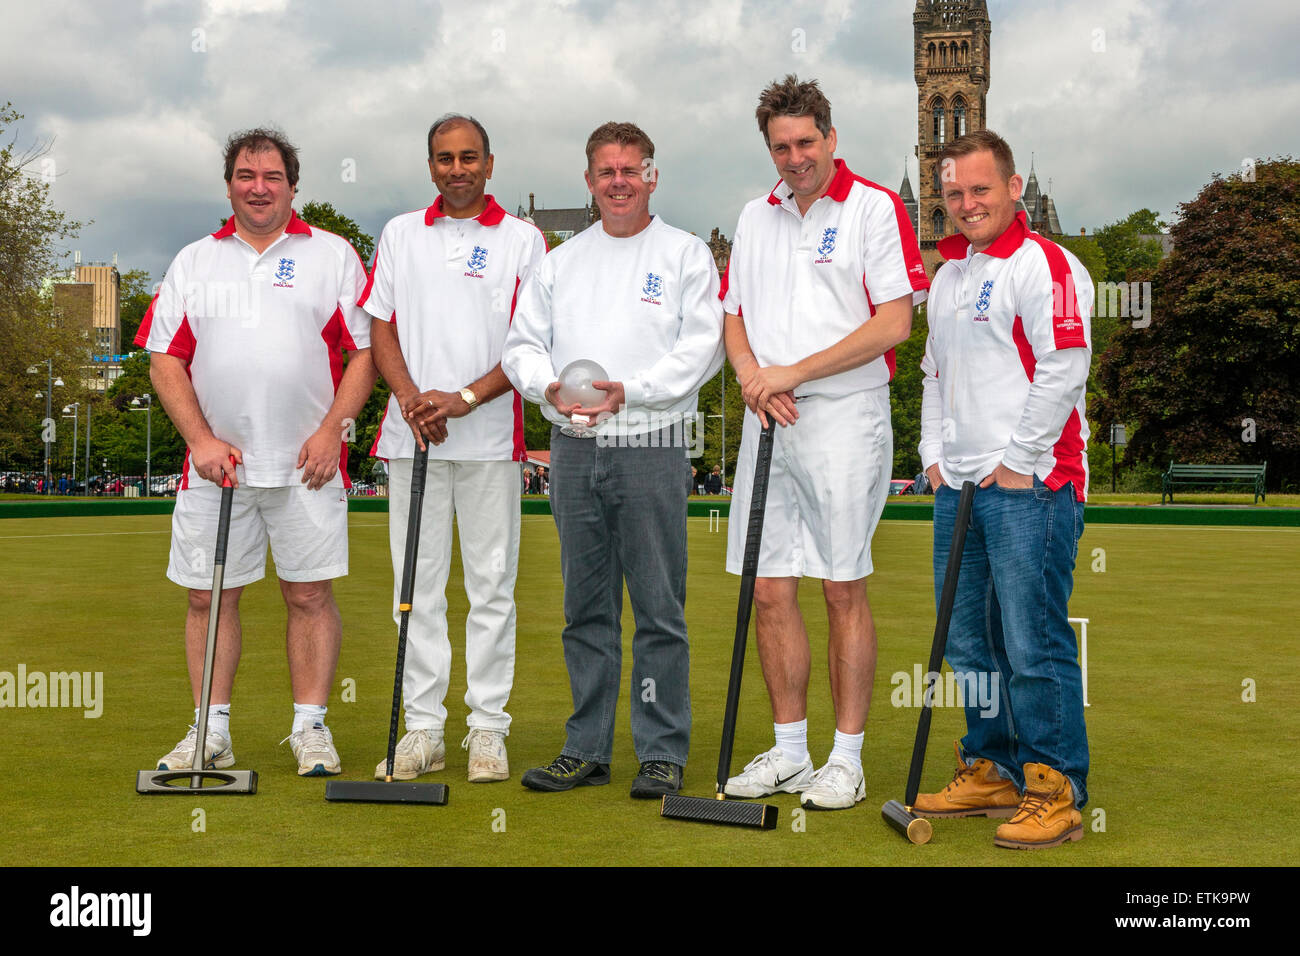 Glasgow, Scotland, UK. 14th June, 2015. On Saturday 13 June and Sunday 14 June Glasgow hosted the annual Four Nations Croquet Tournament at Kelvingrove Park and organised by the Scottish Croquet Association. Players from Scotland, Ireland, England and Wales each played 5 'rubbers' against the opposing teams. This year the winning team was  ENGLAND. Picture is of the winning England team Credit:  Findlay/Alamy Live News Stock Photo